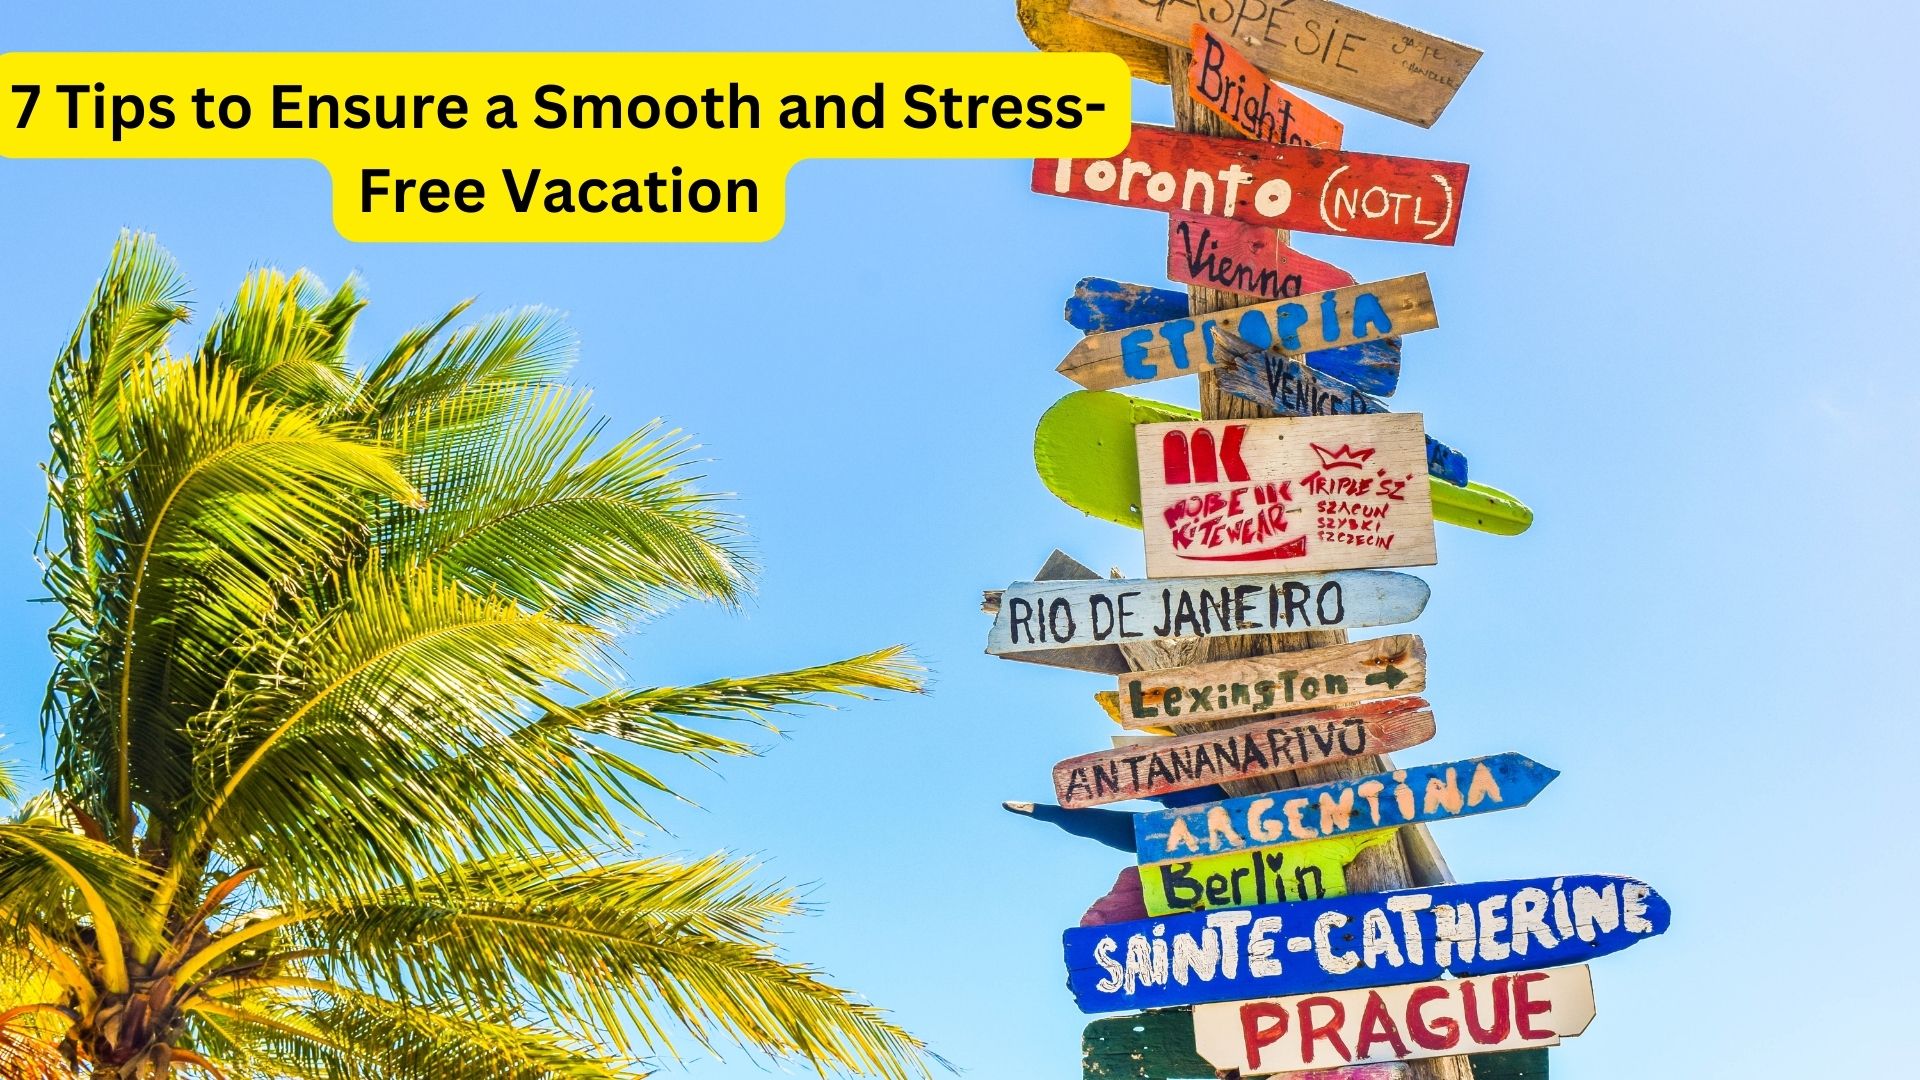 7 Tips to Ensure a Smooth and Stress-Free Vacation